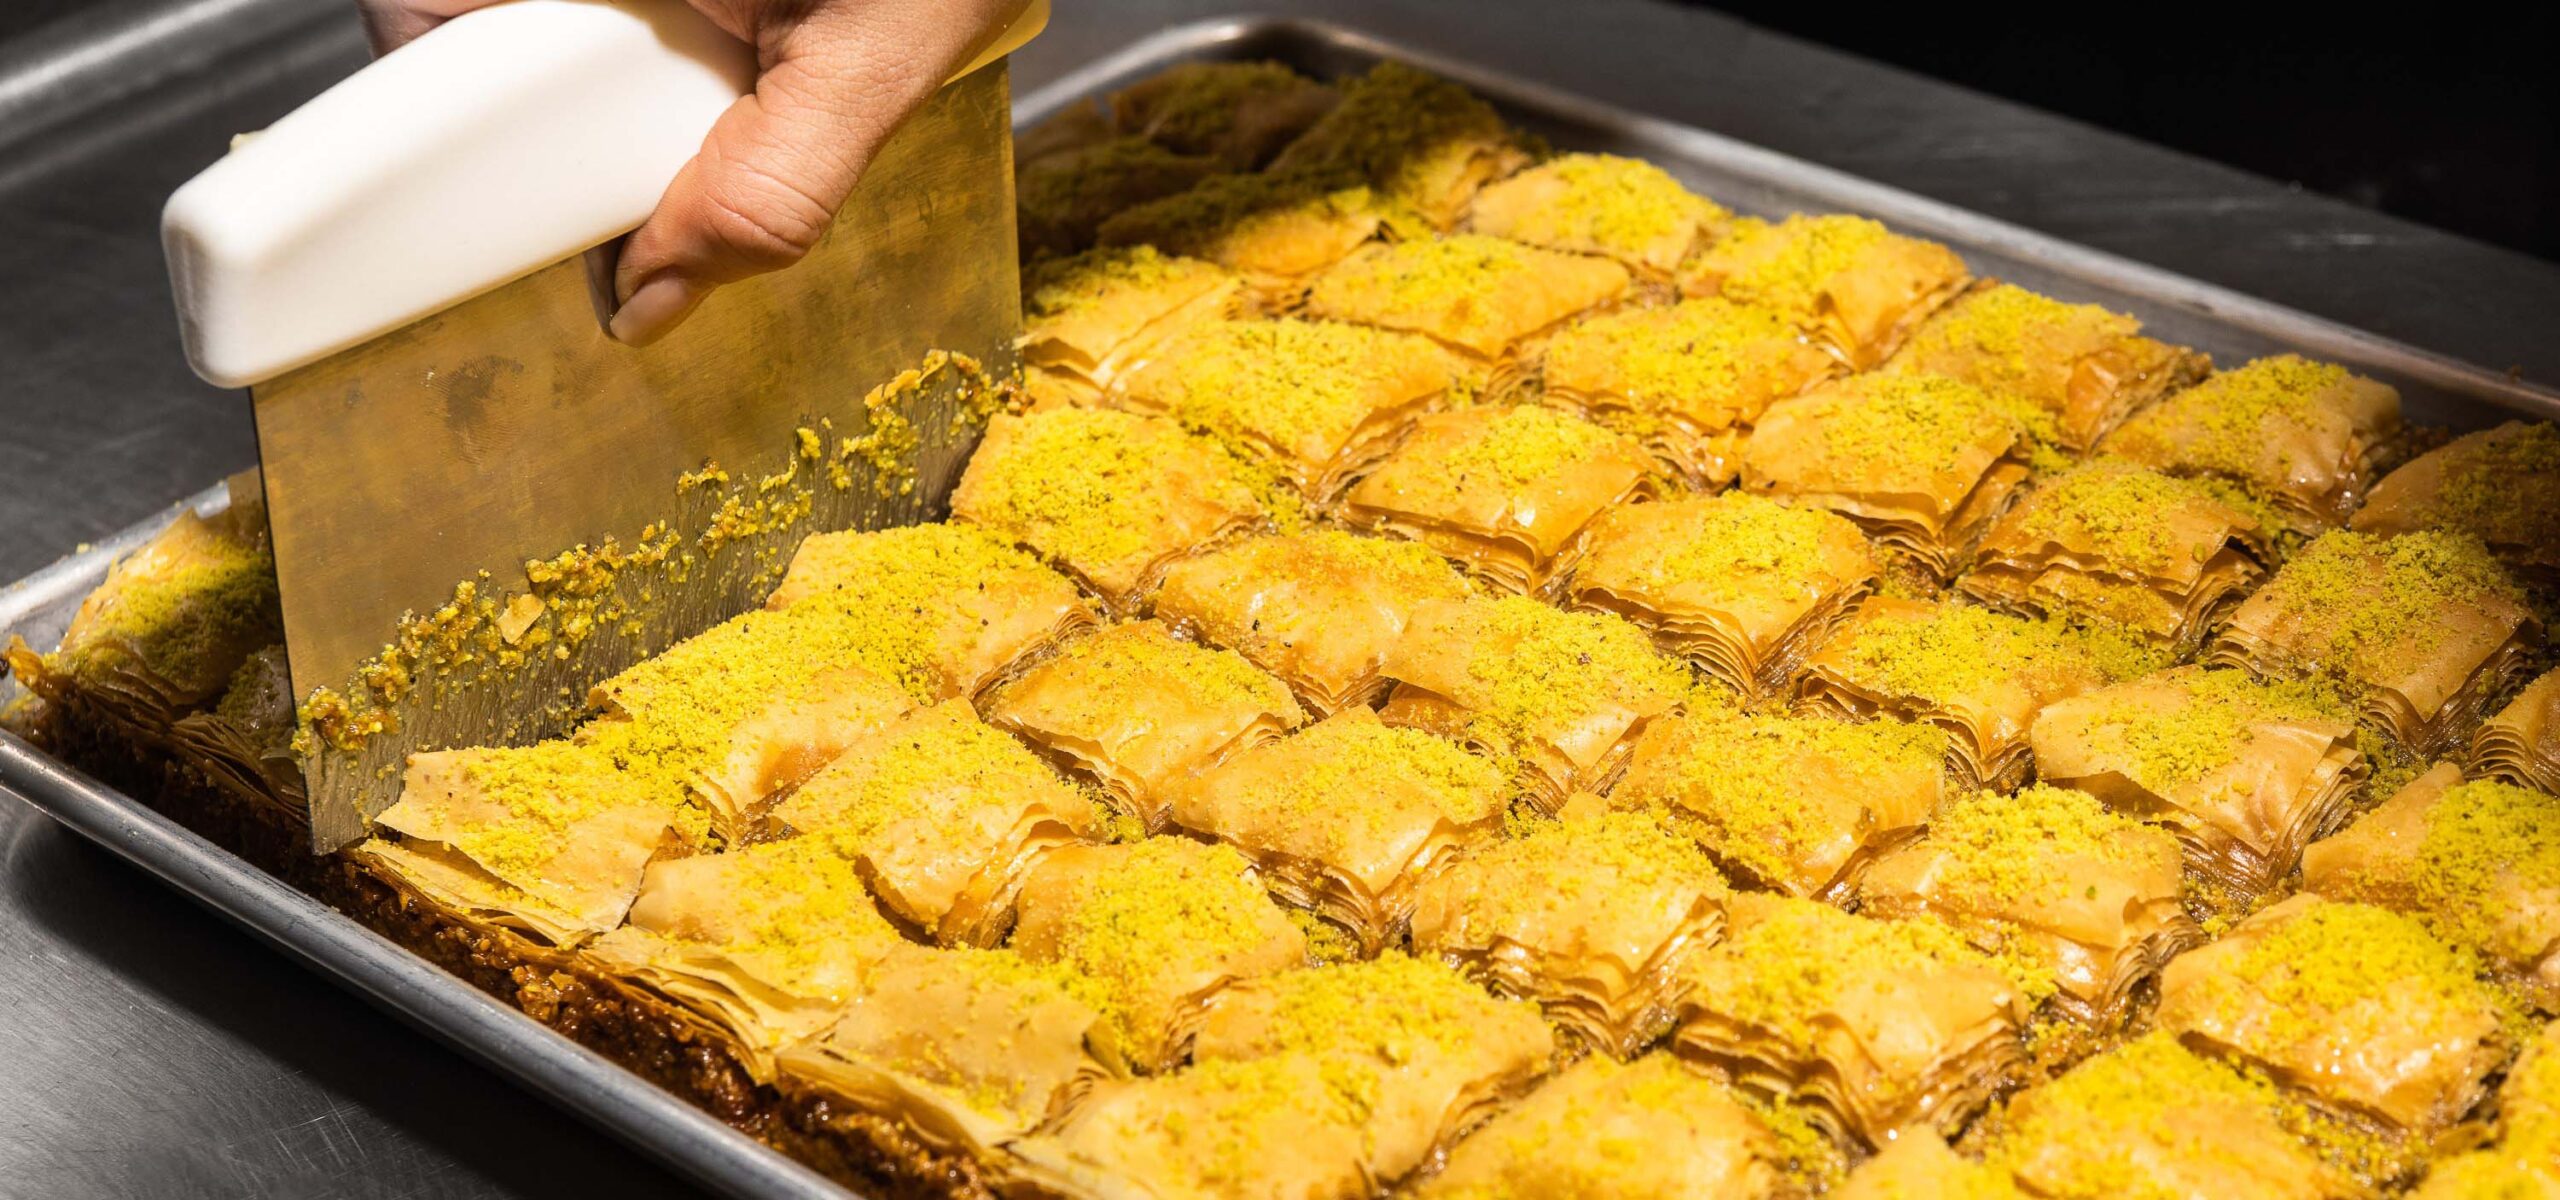 Tray of baklava being sliced into squares.